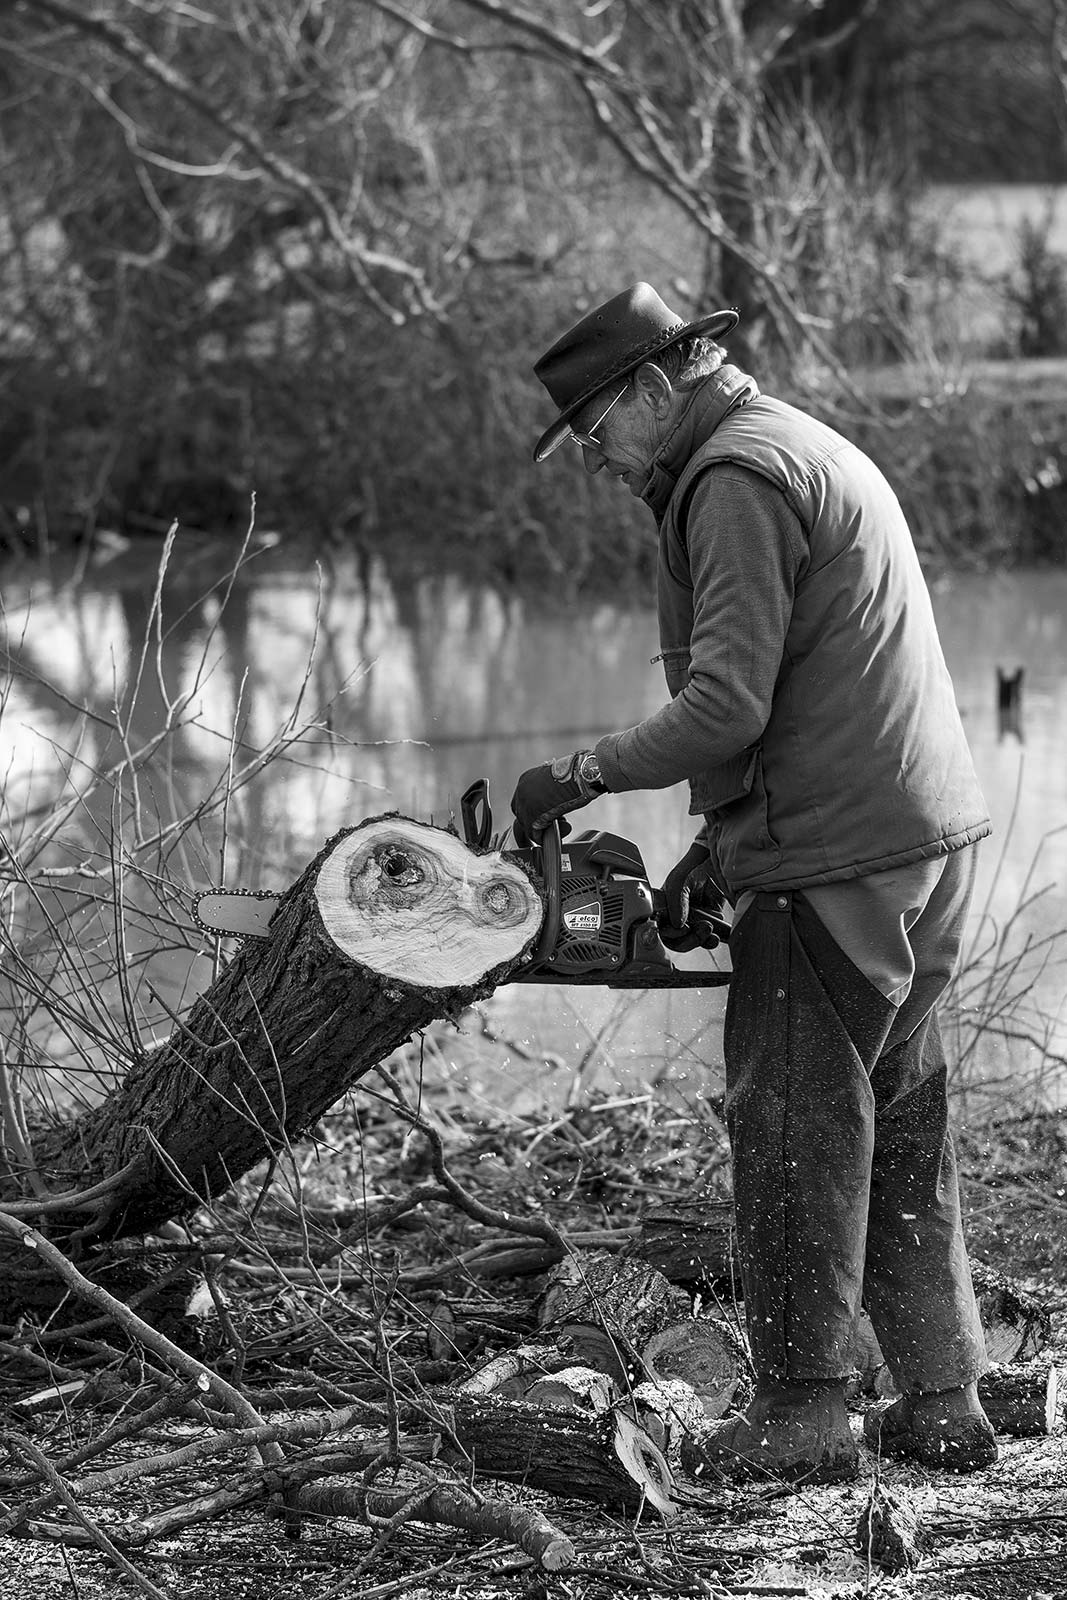 man in hat sawing Willow with a chainsaw, side profile black and white rural environmental portrait Gabriel's Fisheries Kent UK ©P. Maton 2019 eyeteeth.net